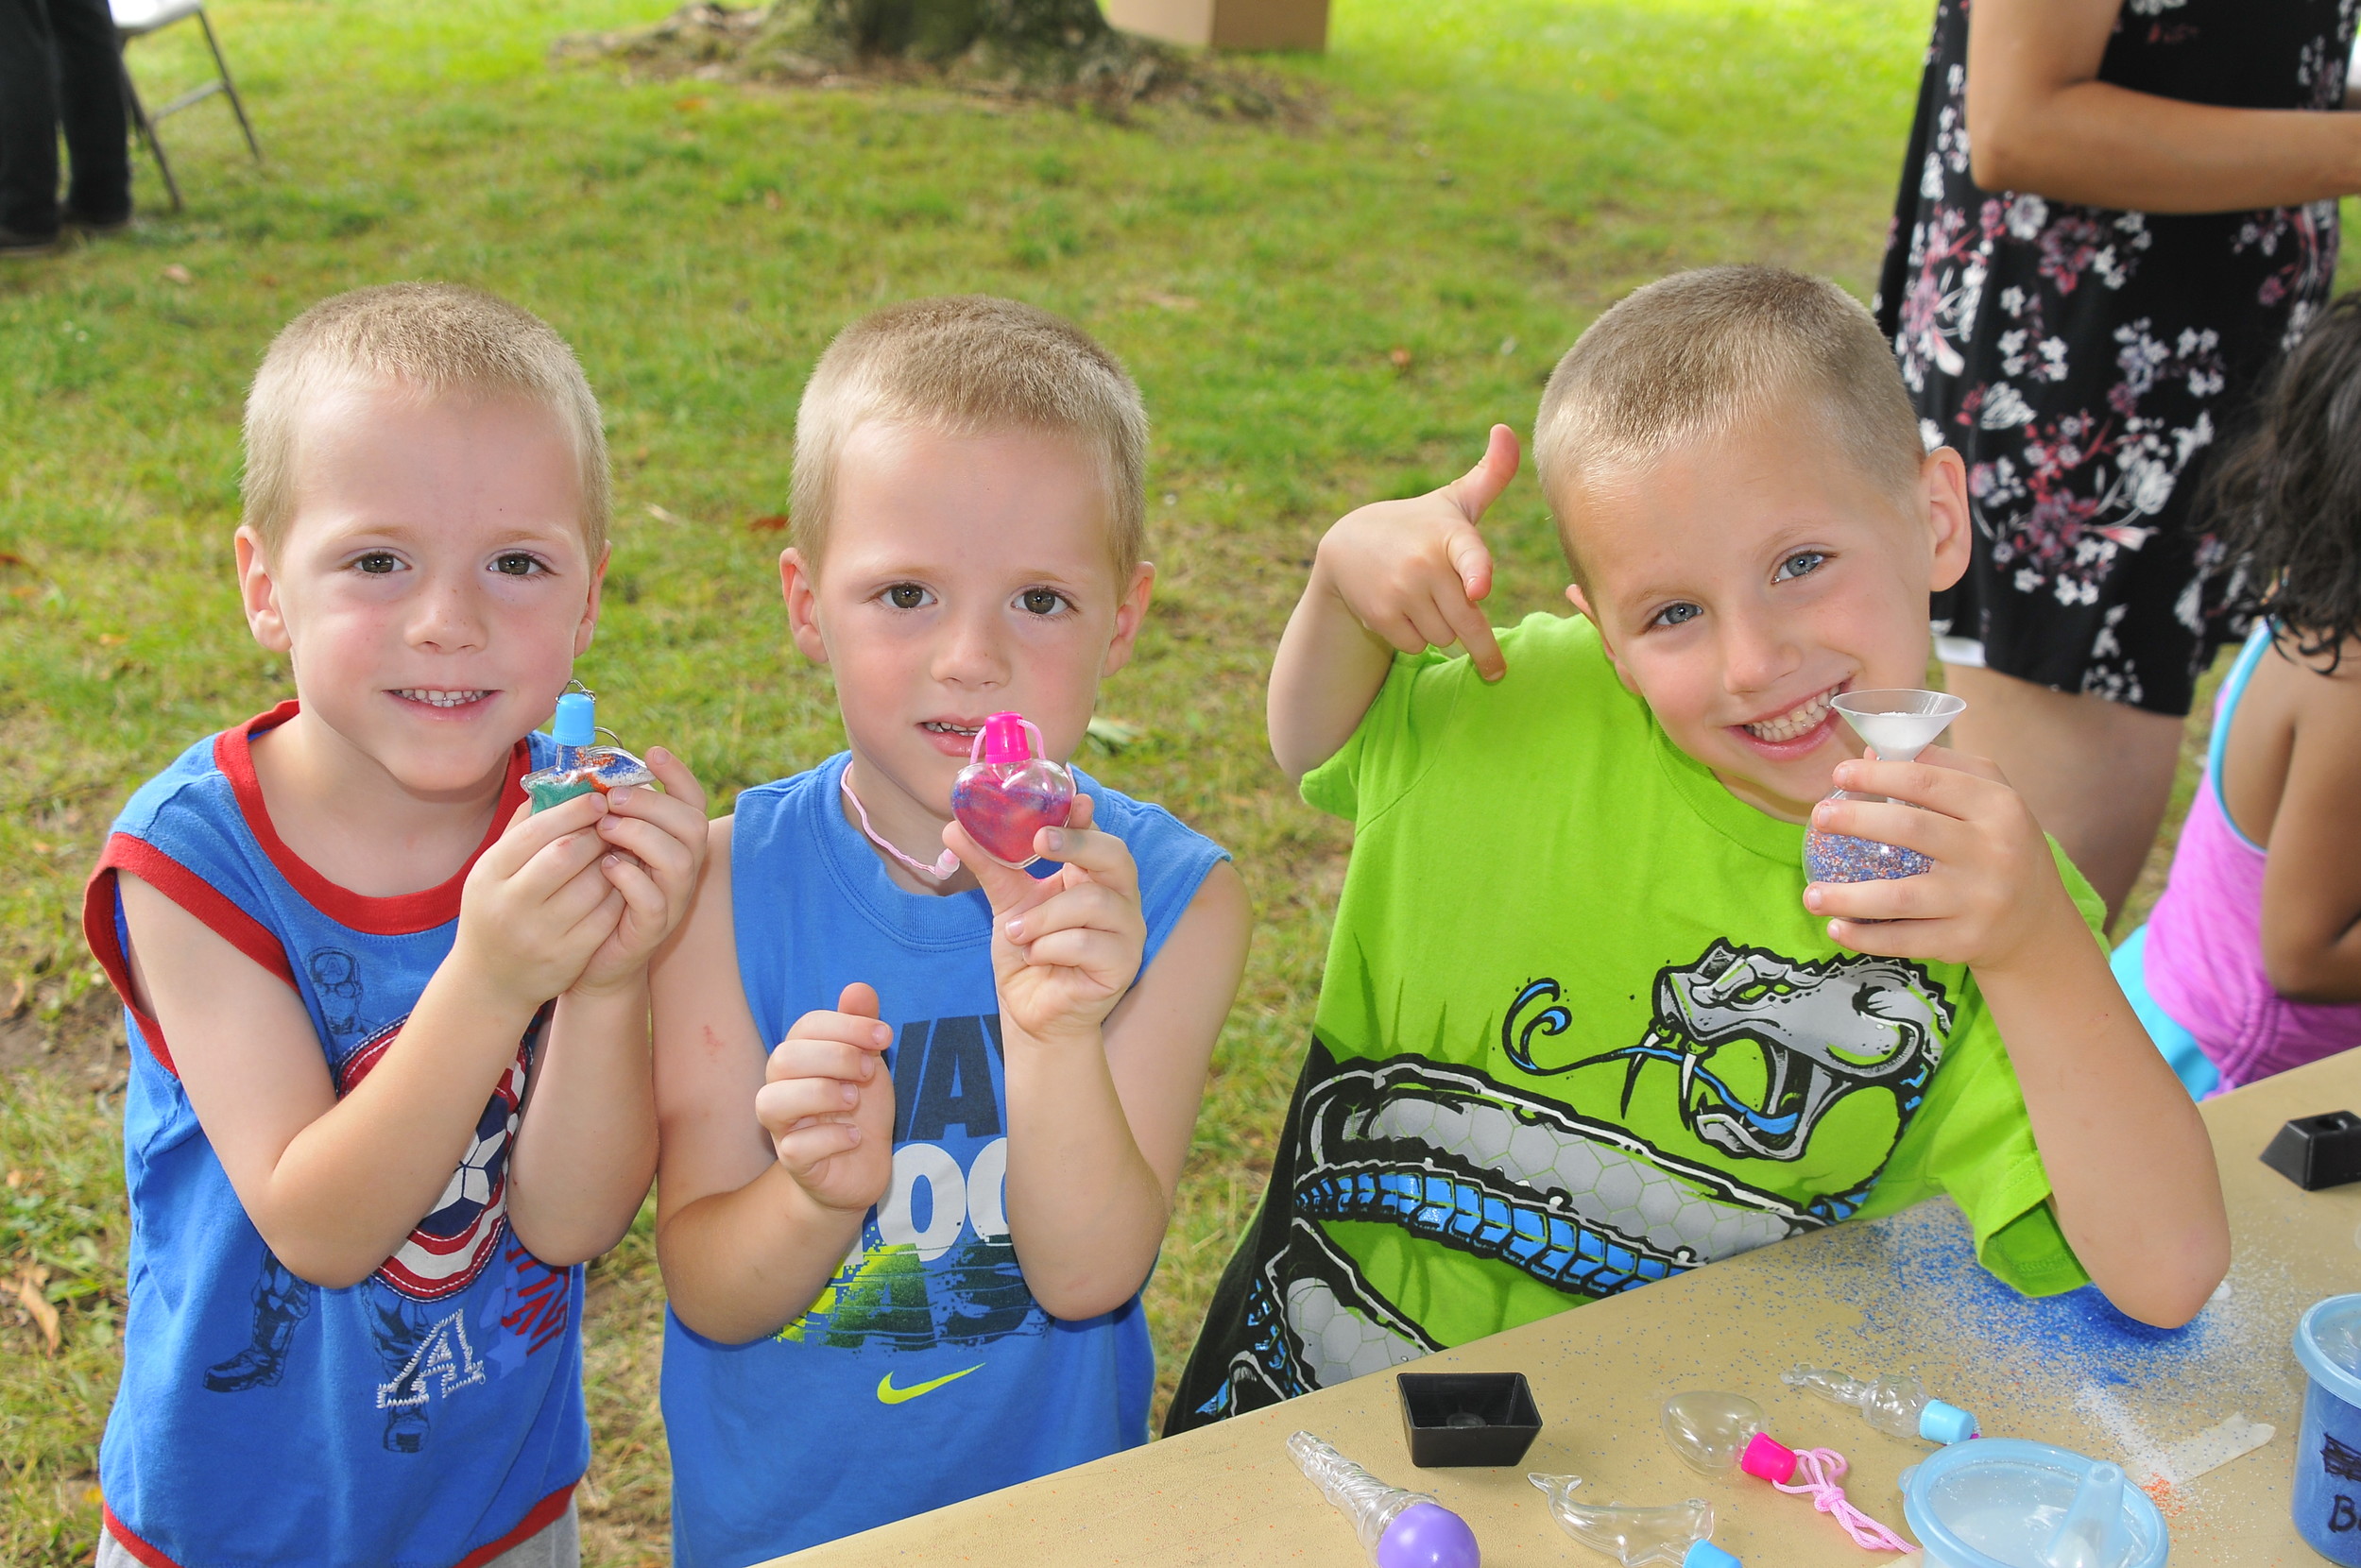 Blake, left, Kameron and Landon Tamberelli had a fun time creating sand art at the 20th annual Lazy Days of Summer festival in Levittown.